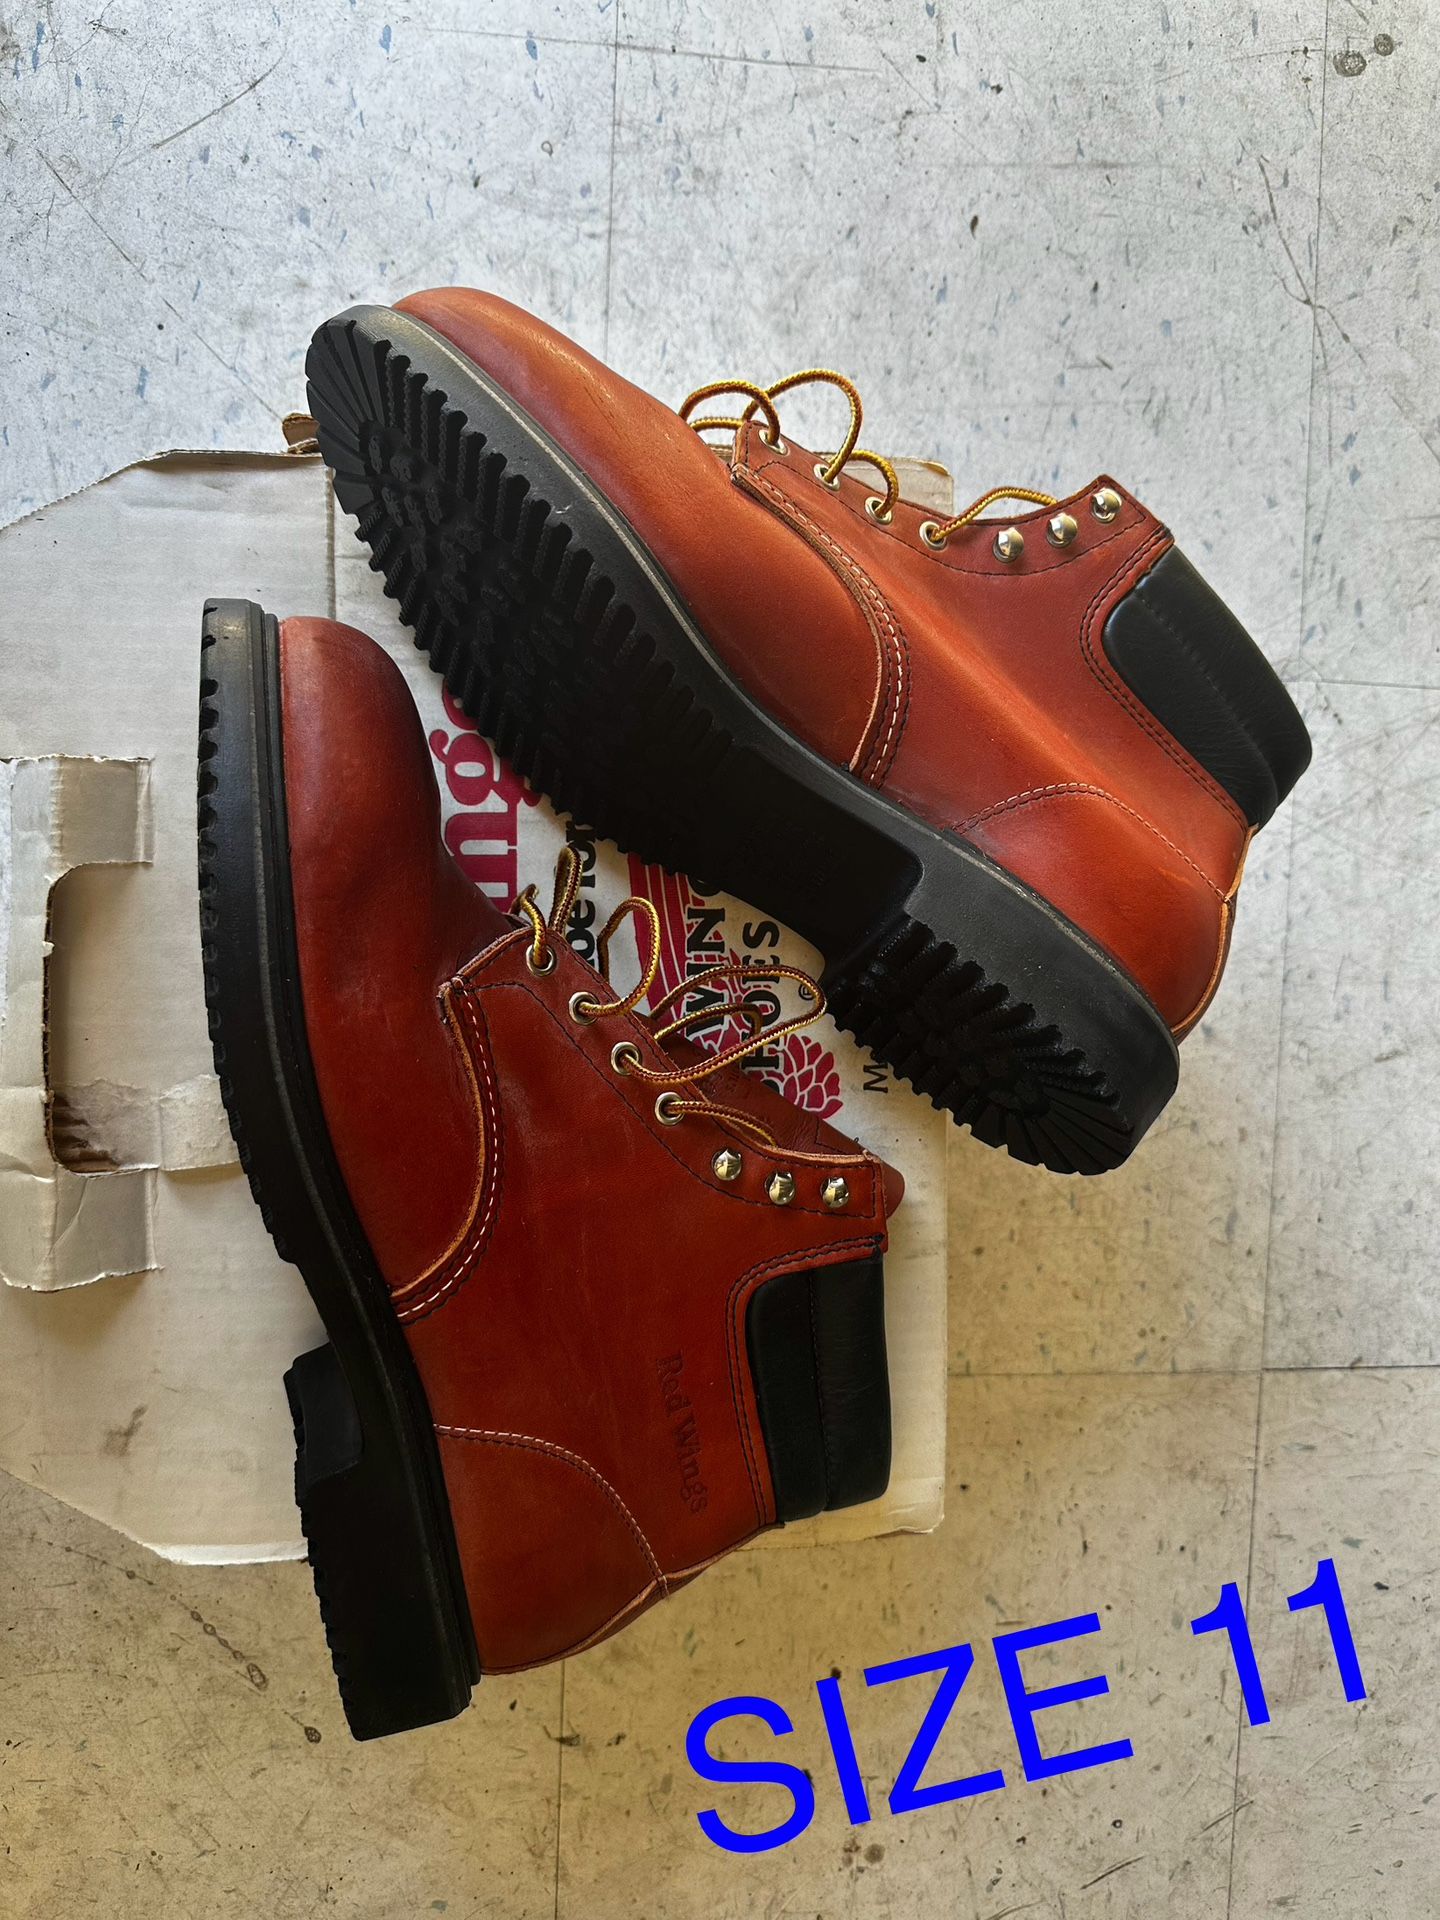 NEW Men’s Boots Size 10.5 & 11